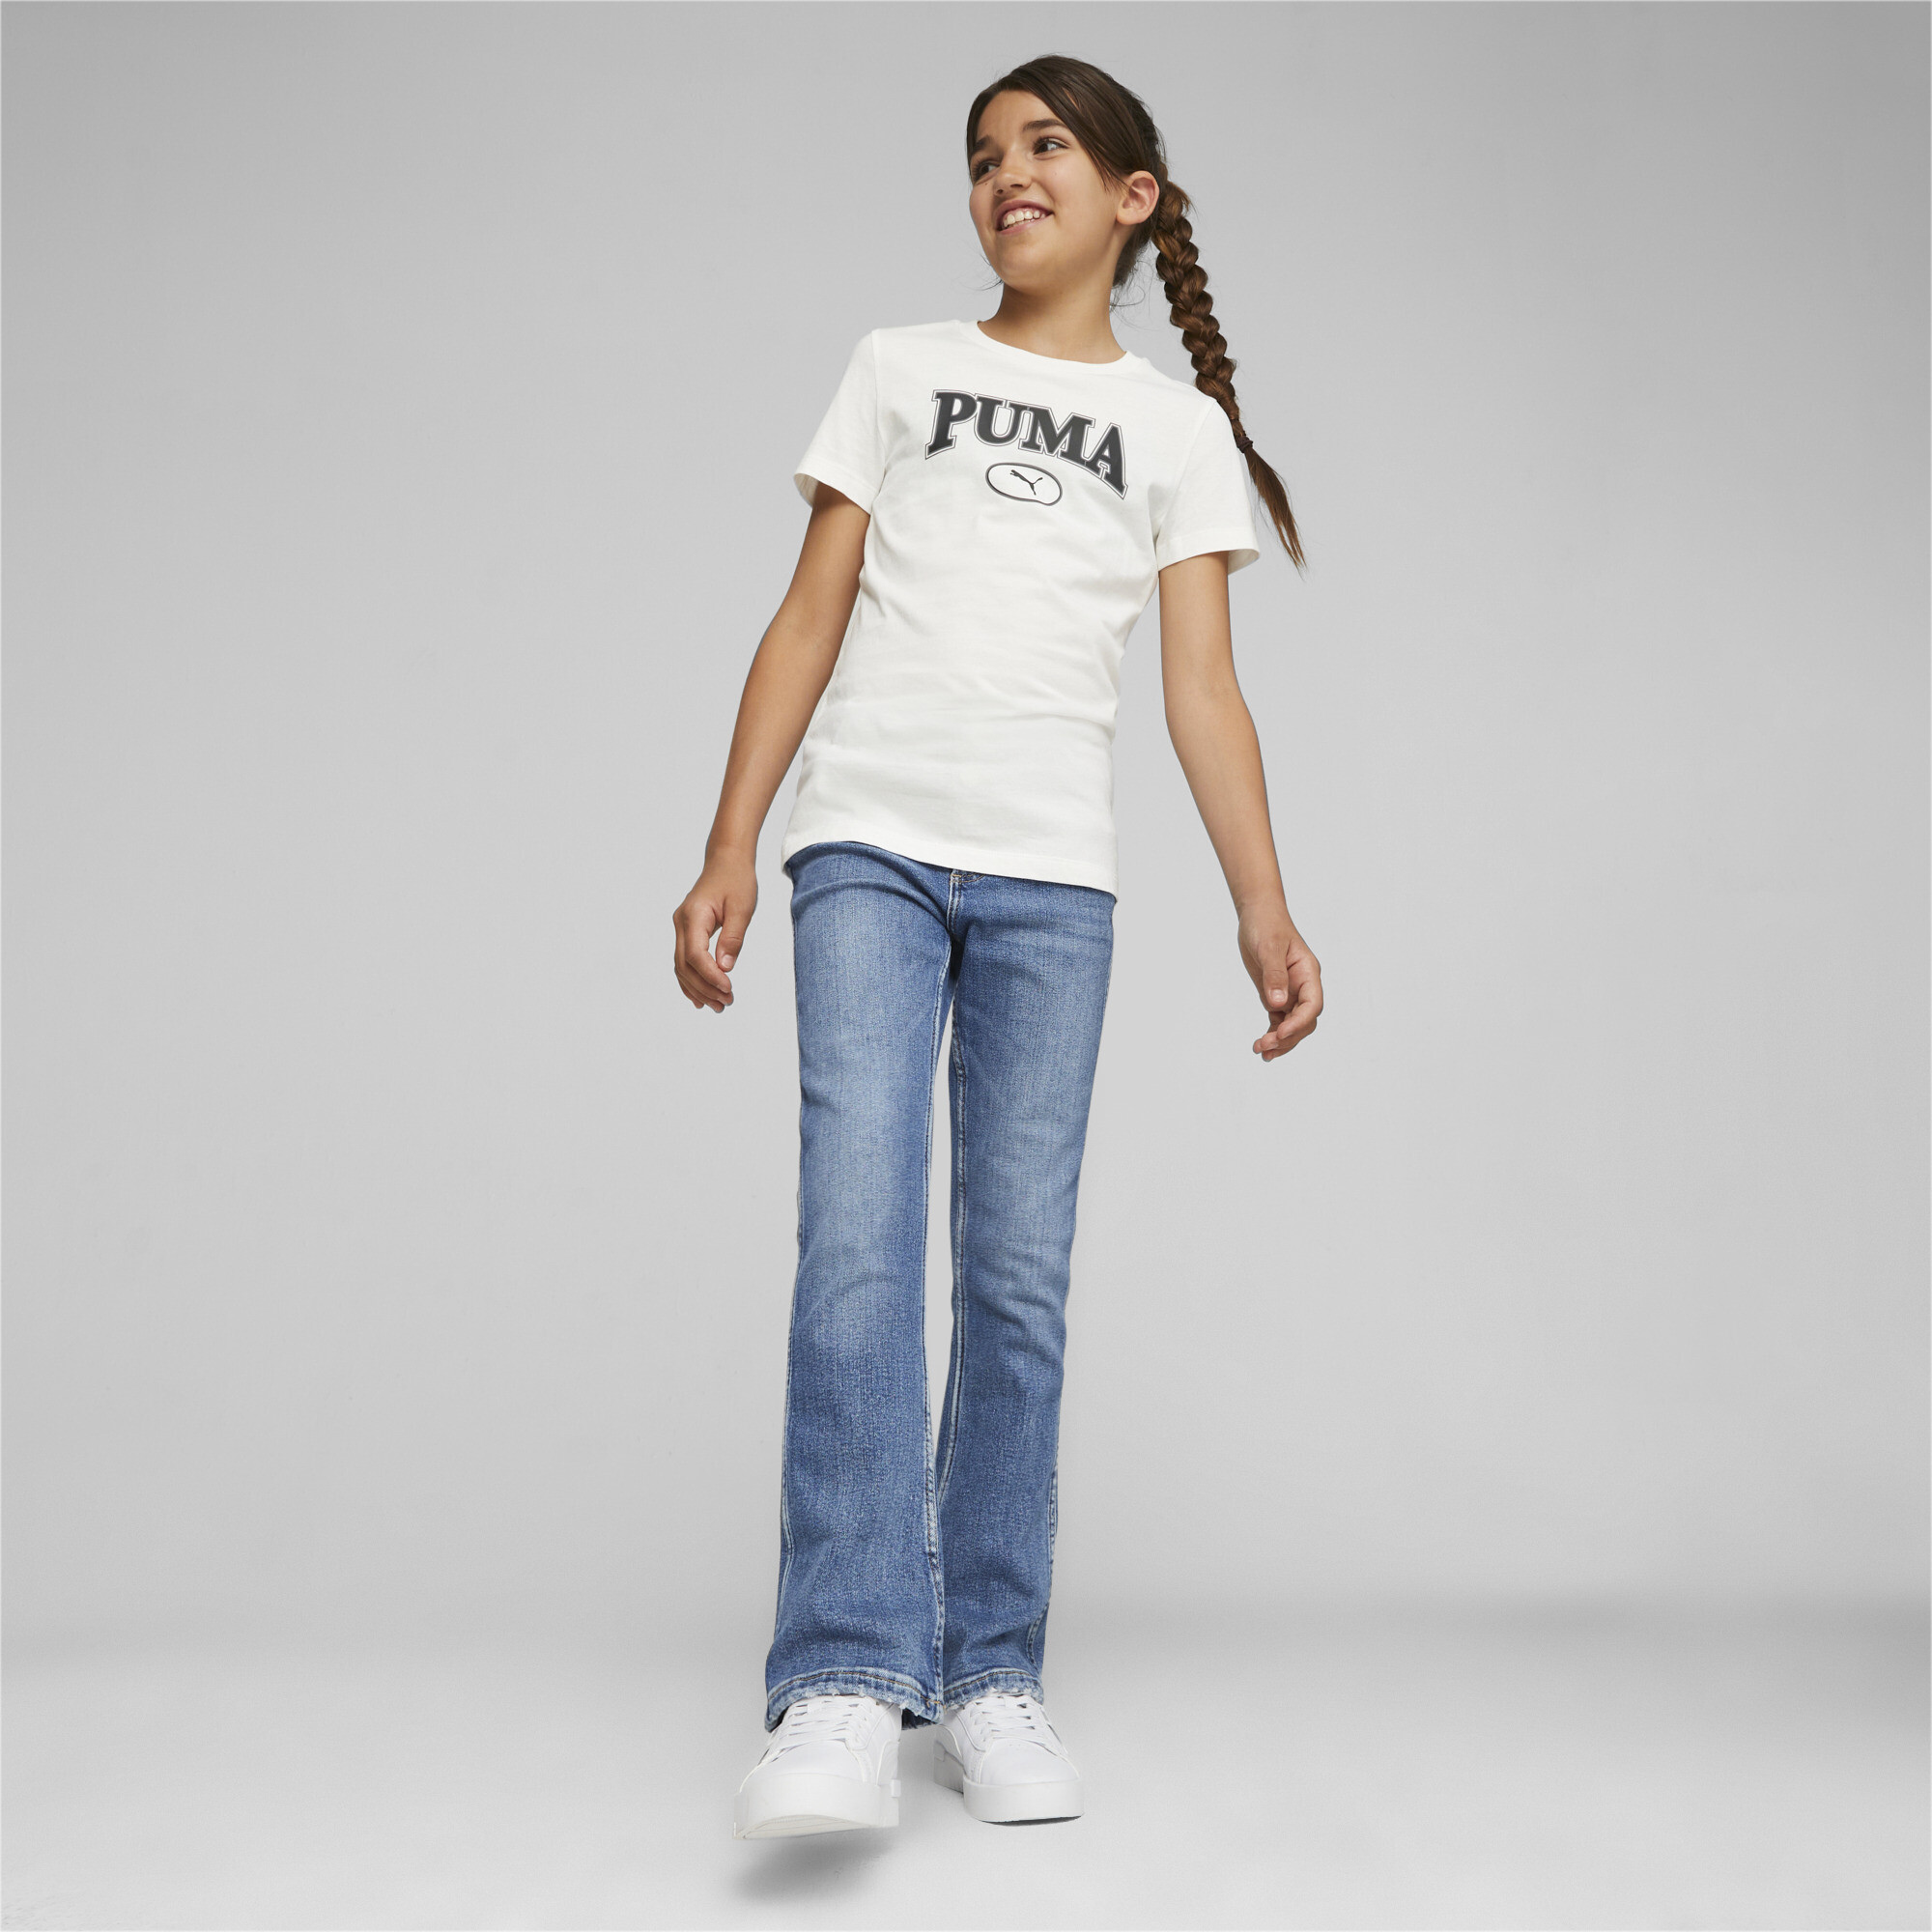 PUMA SQUAD Graphic T-Shirt In White, Size 15-16 Youth